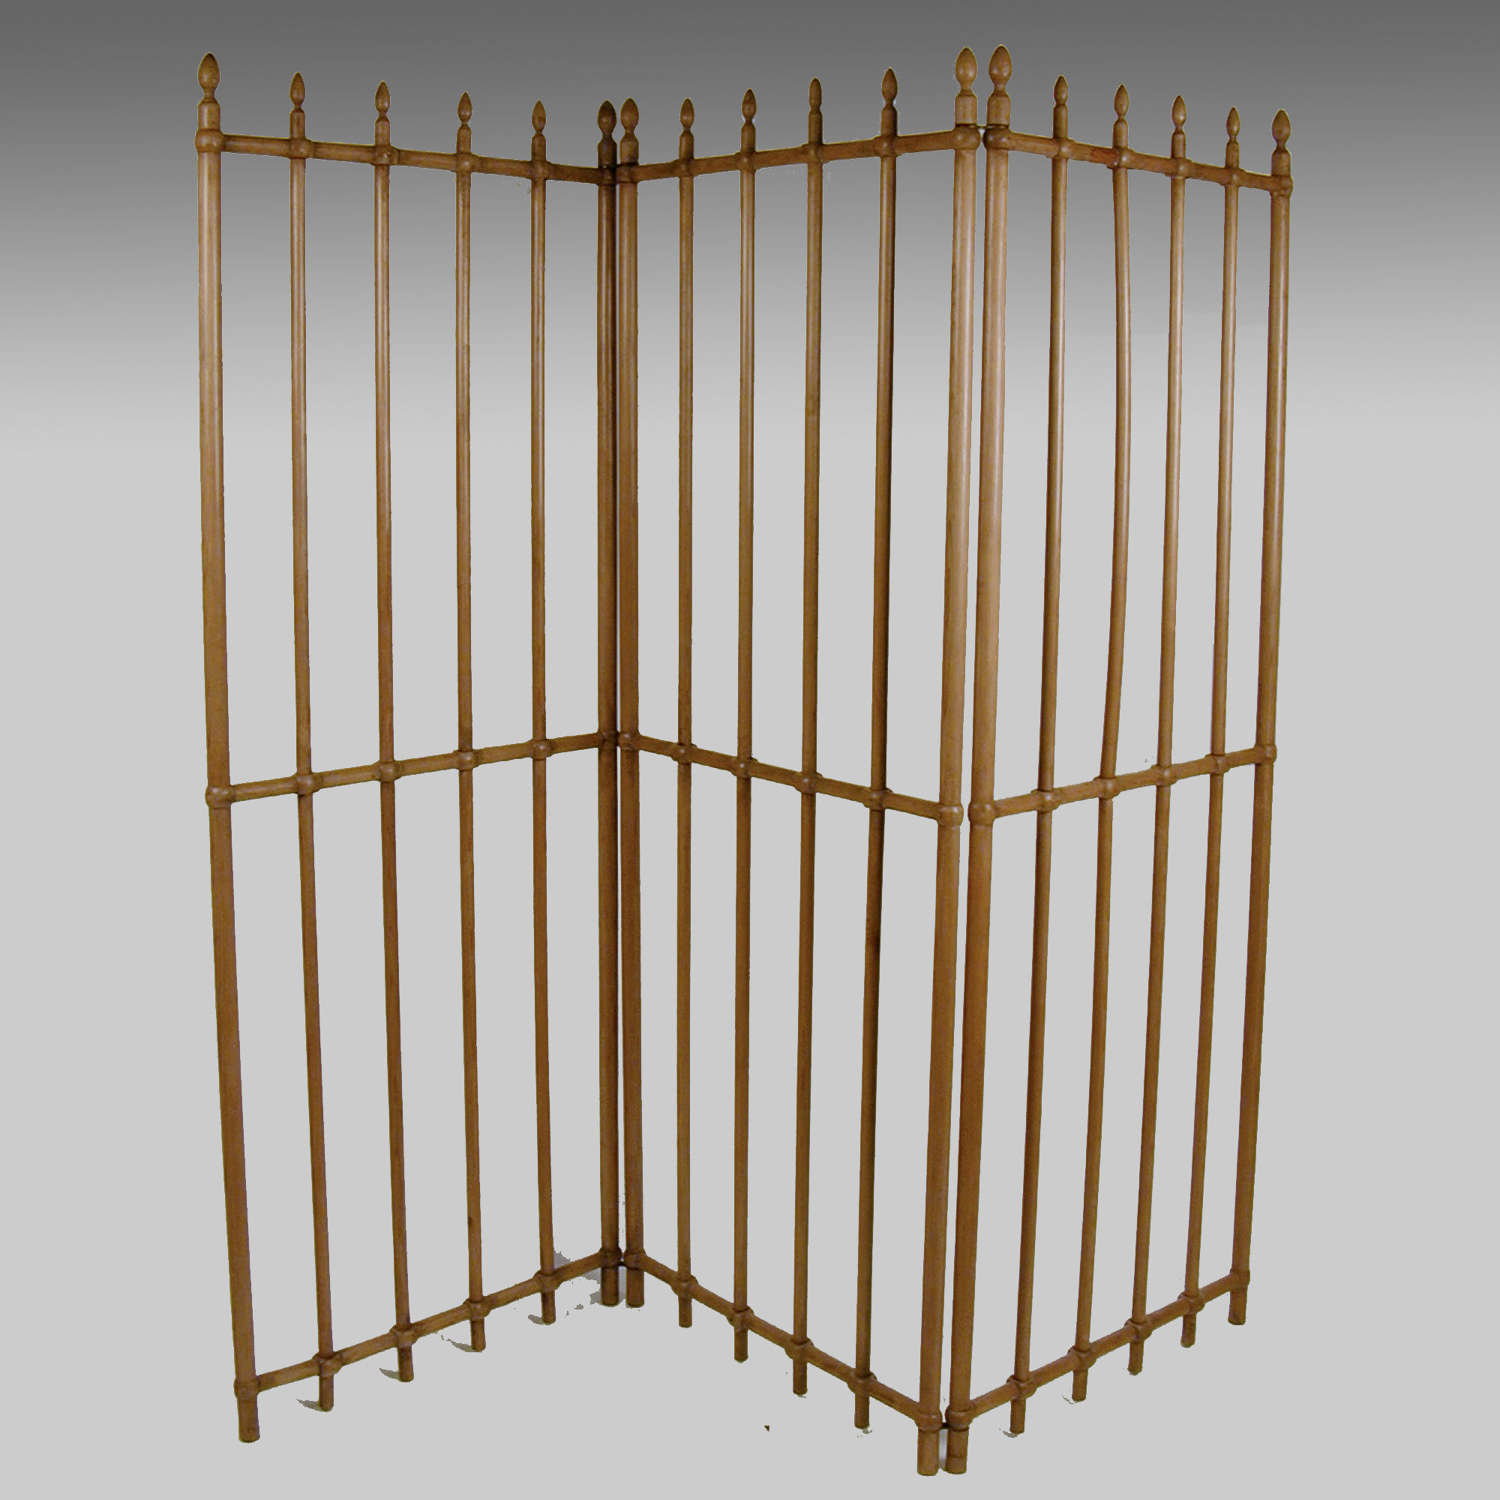 Anglo-French 19th century polished pine screen